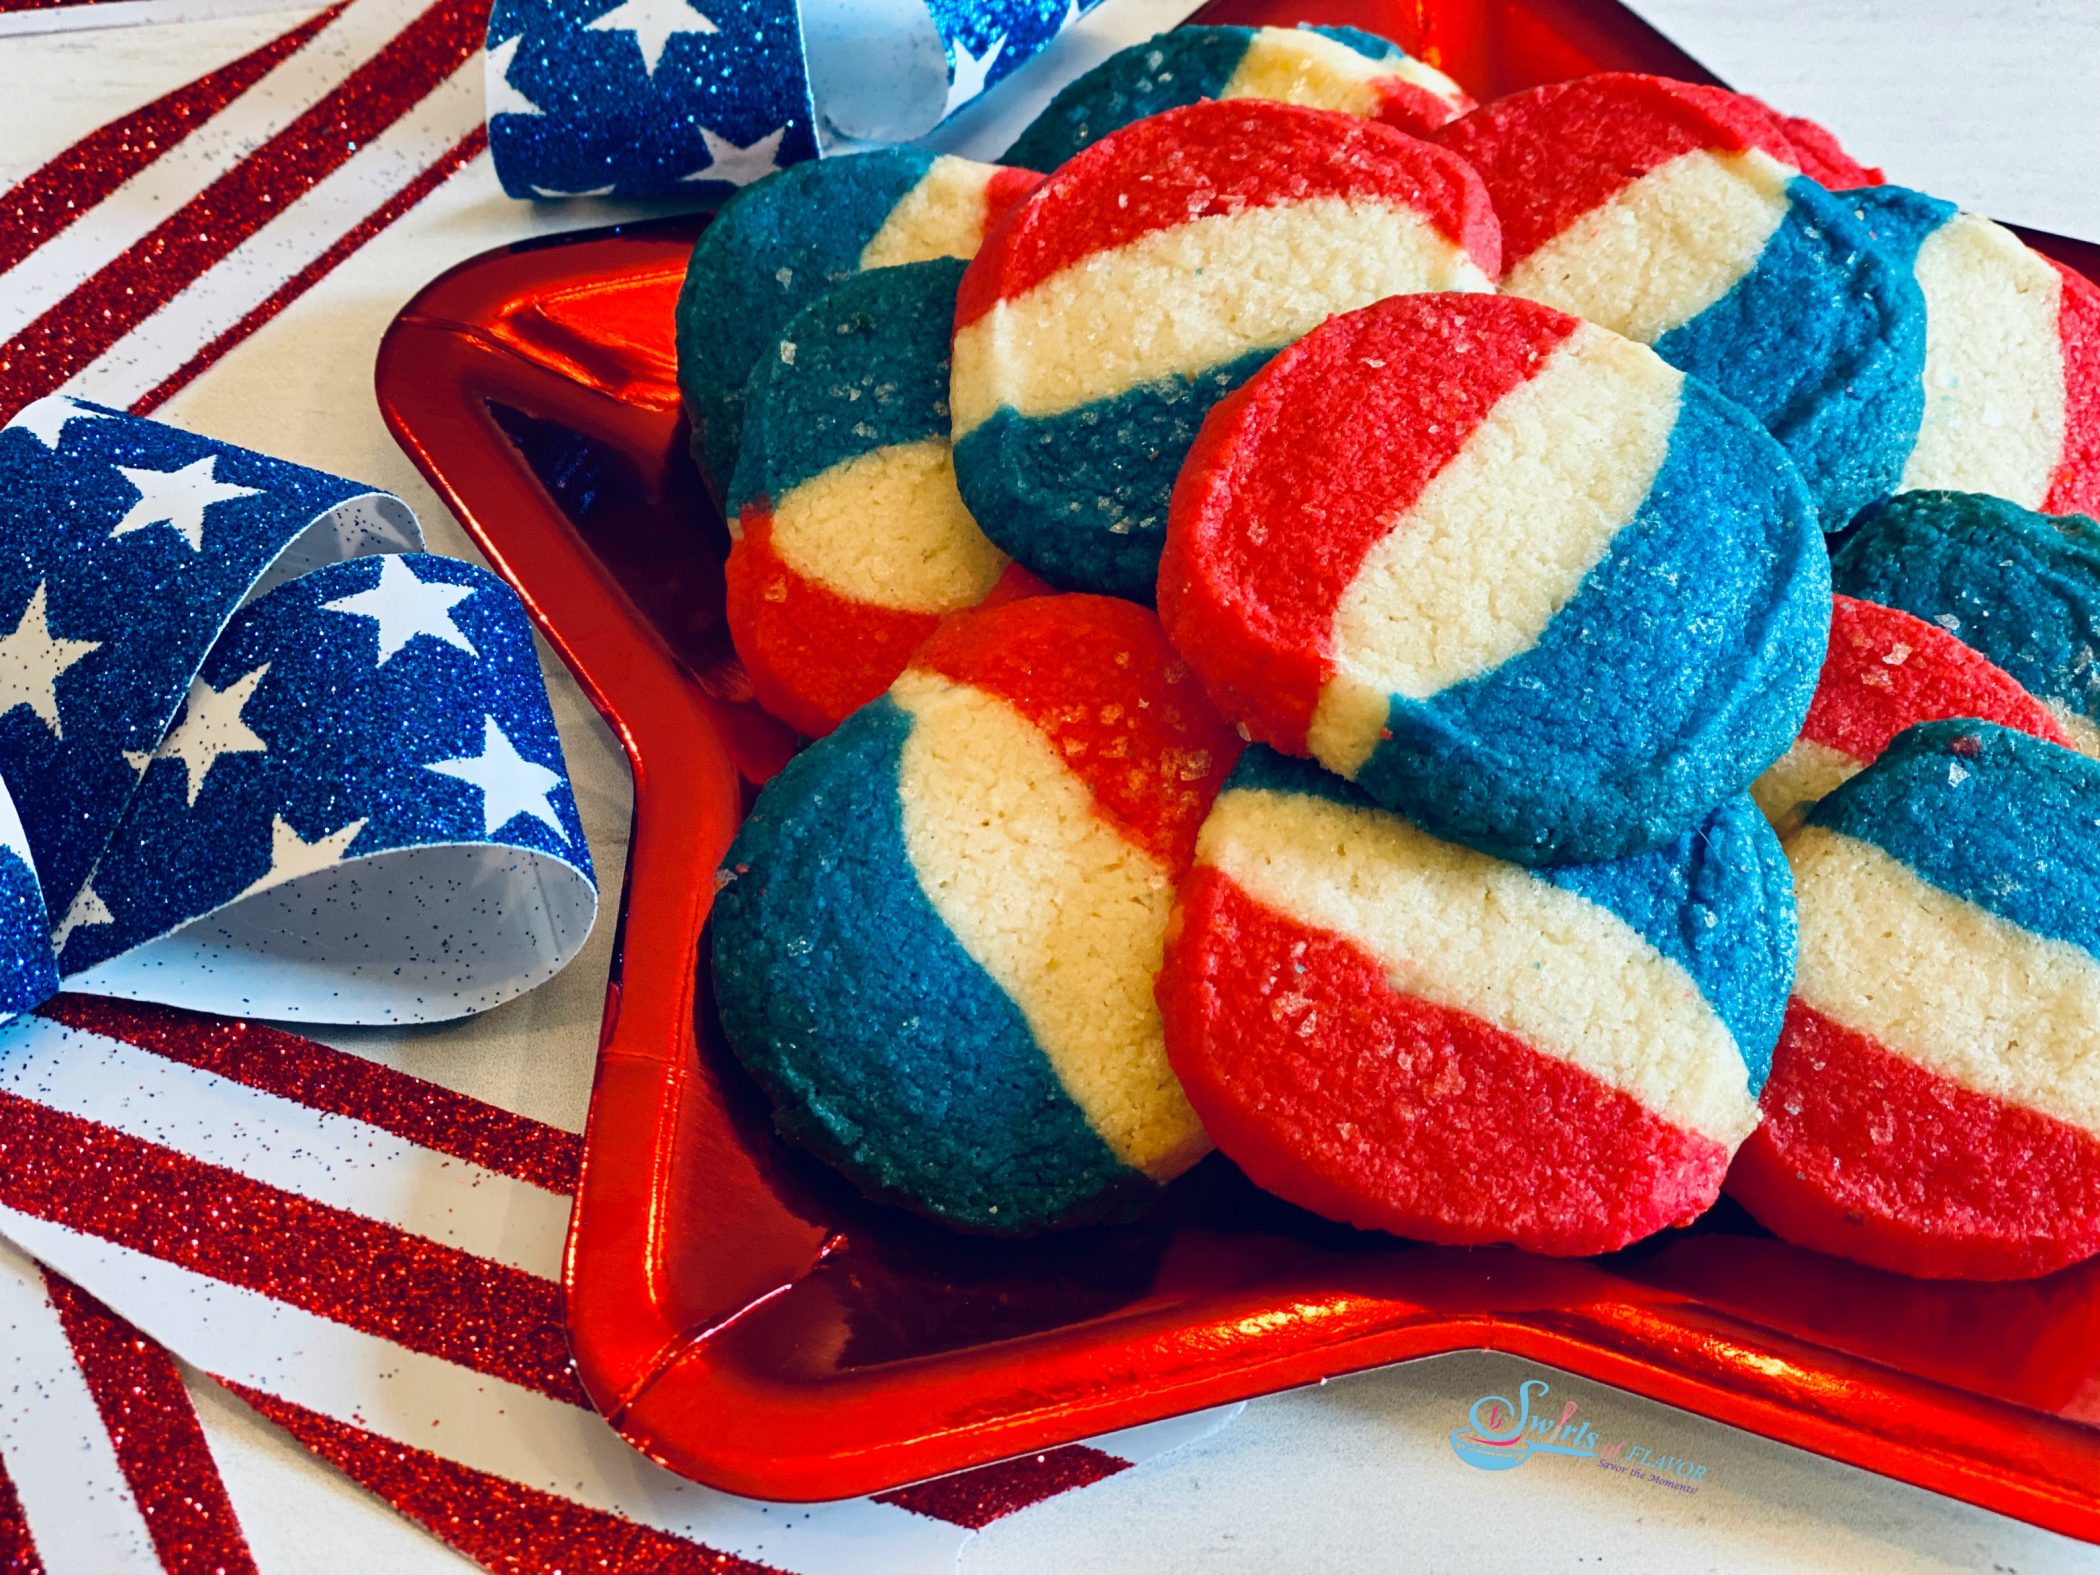 Red white and blue striped cookies on a red star plate